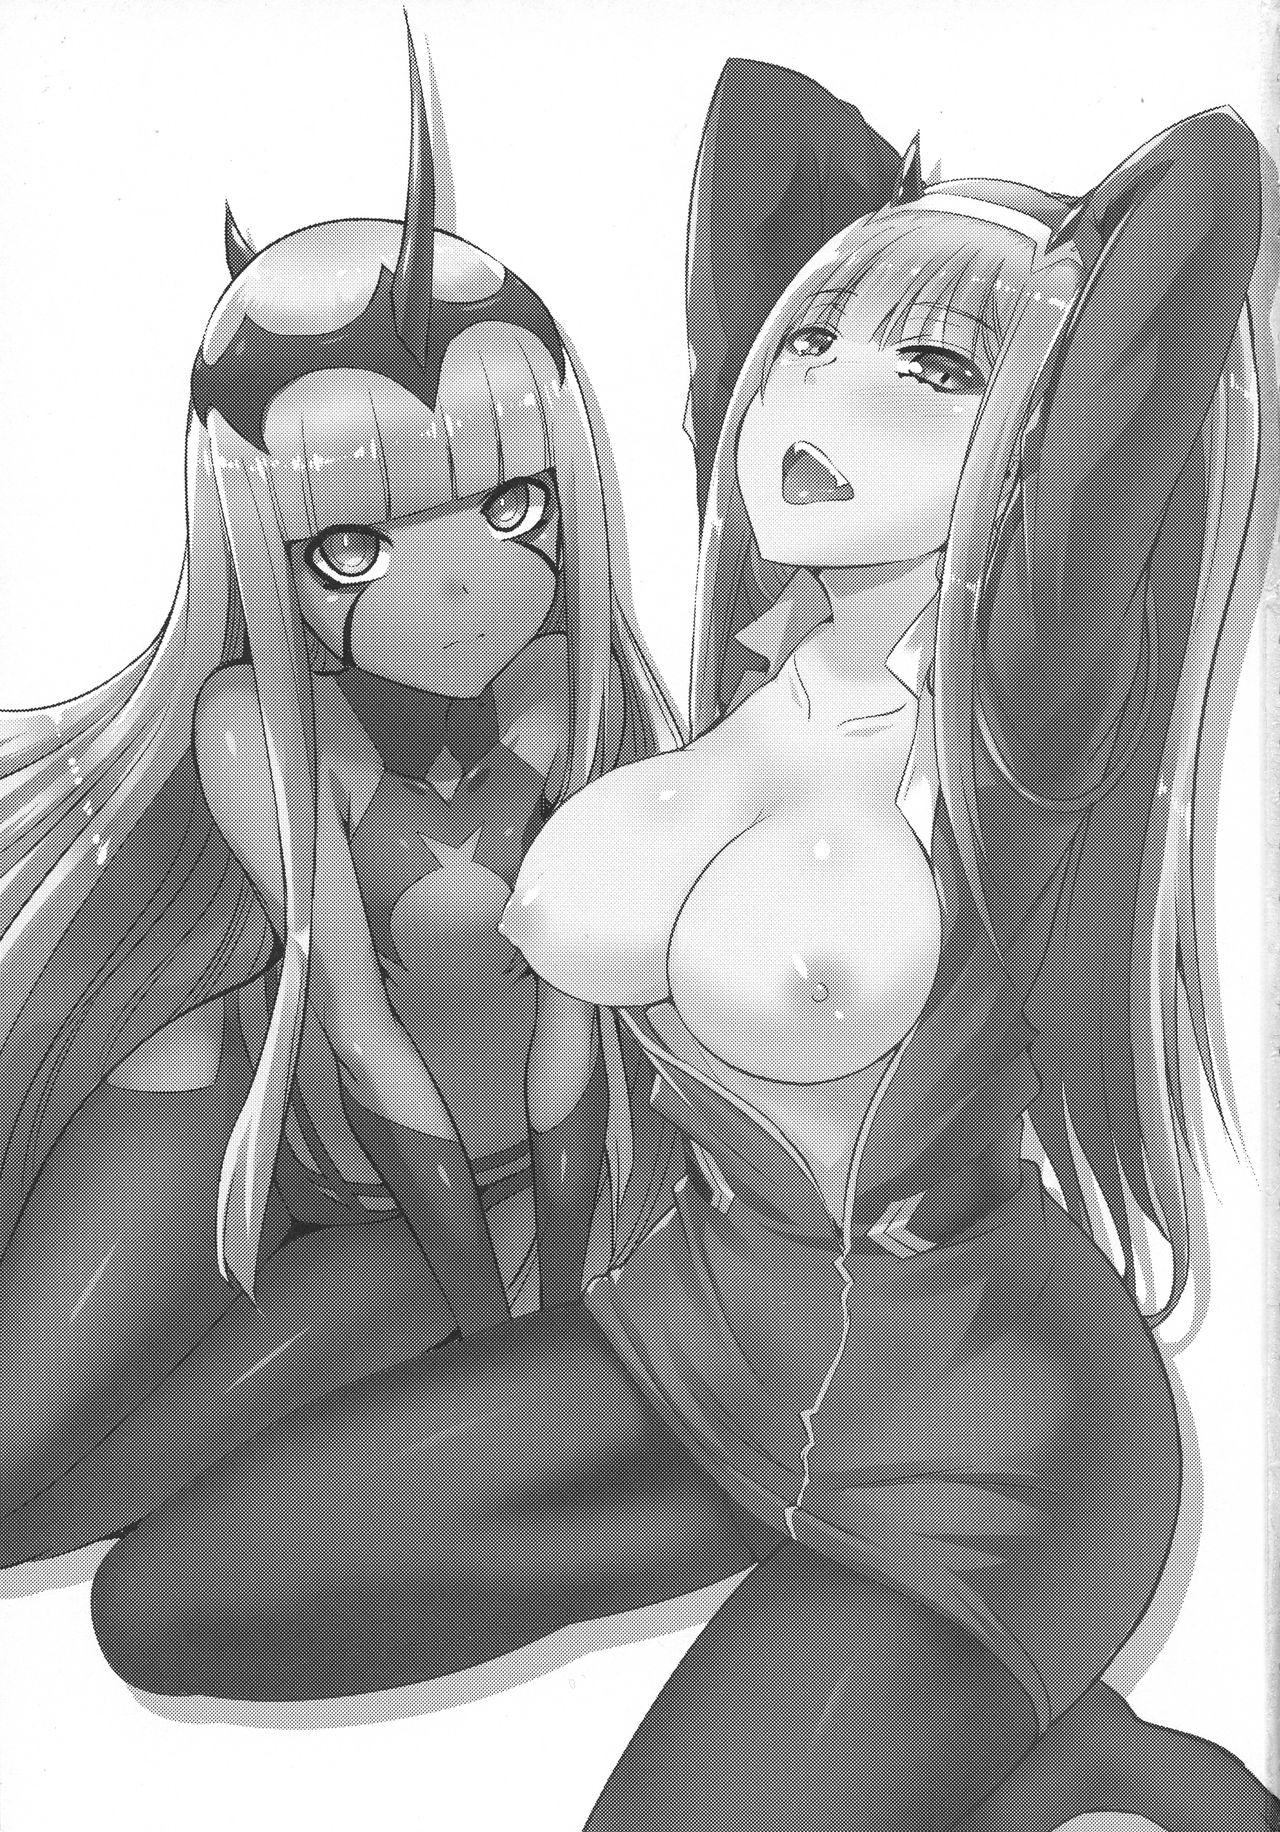 Dirty Darling in the One and Two - Darling in the franxx Super Hot Porn - Page 2